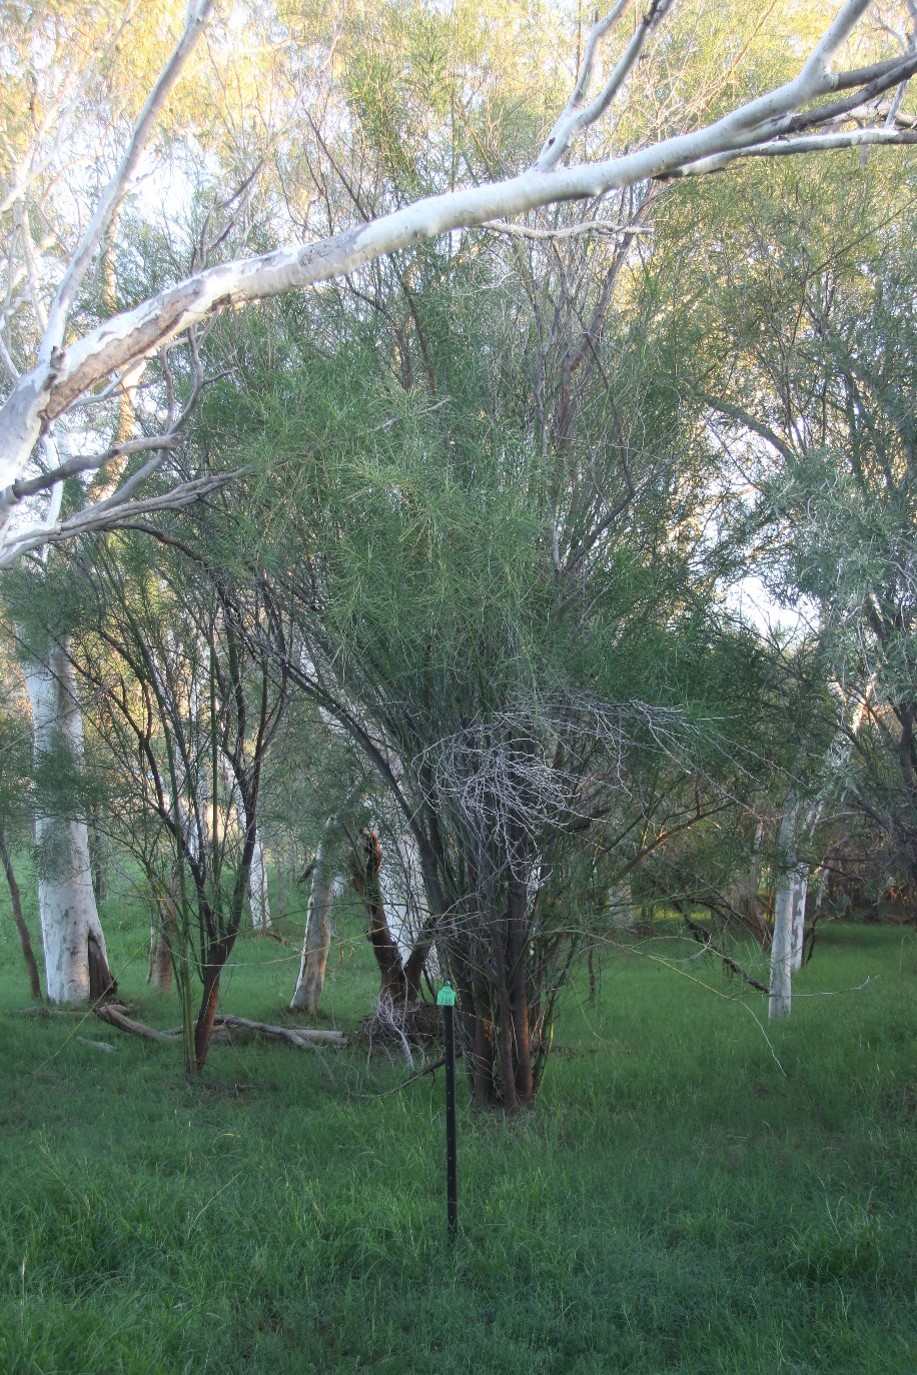 Parkinsonia reference site at Hillside Station